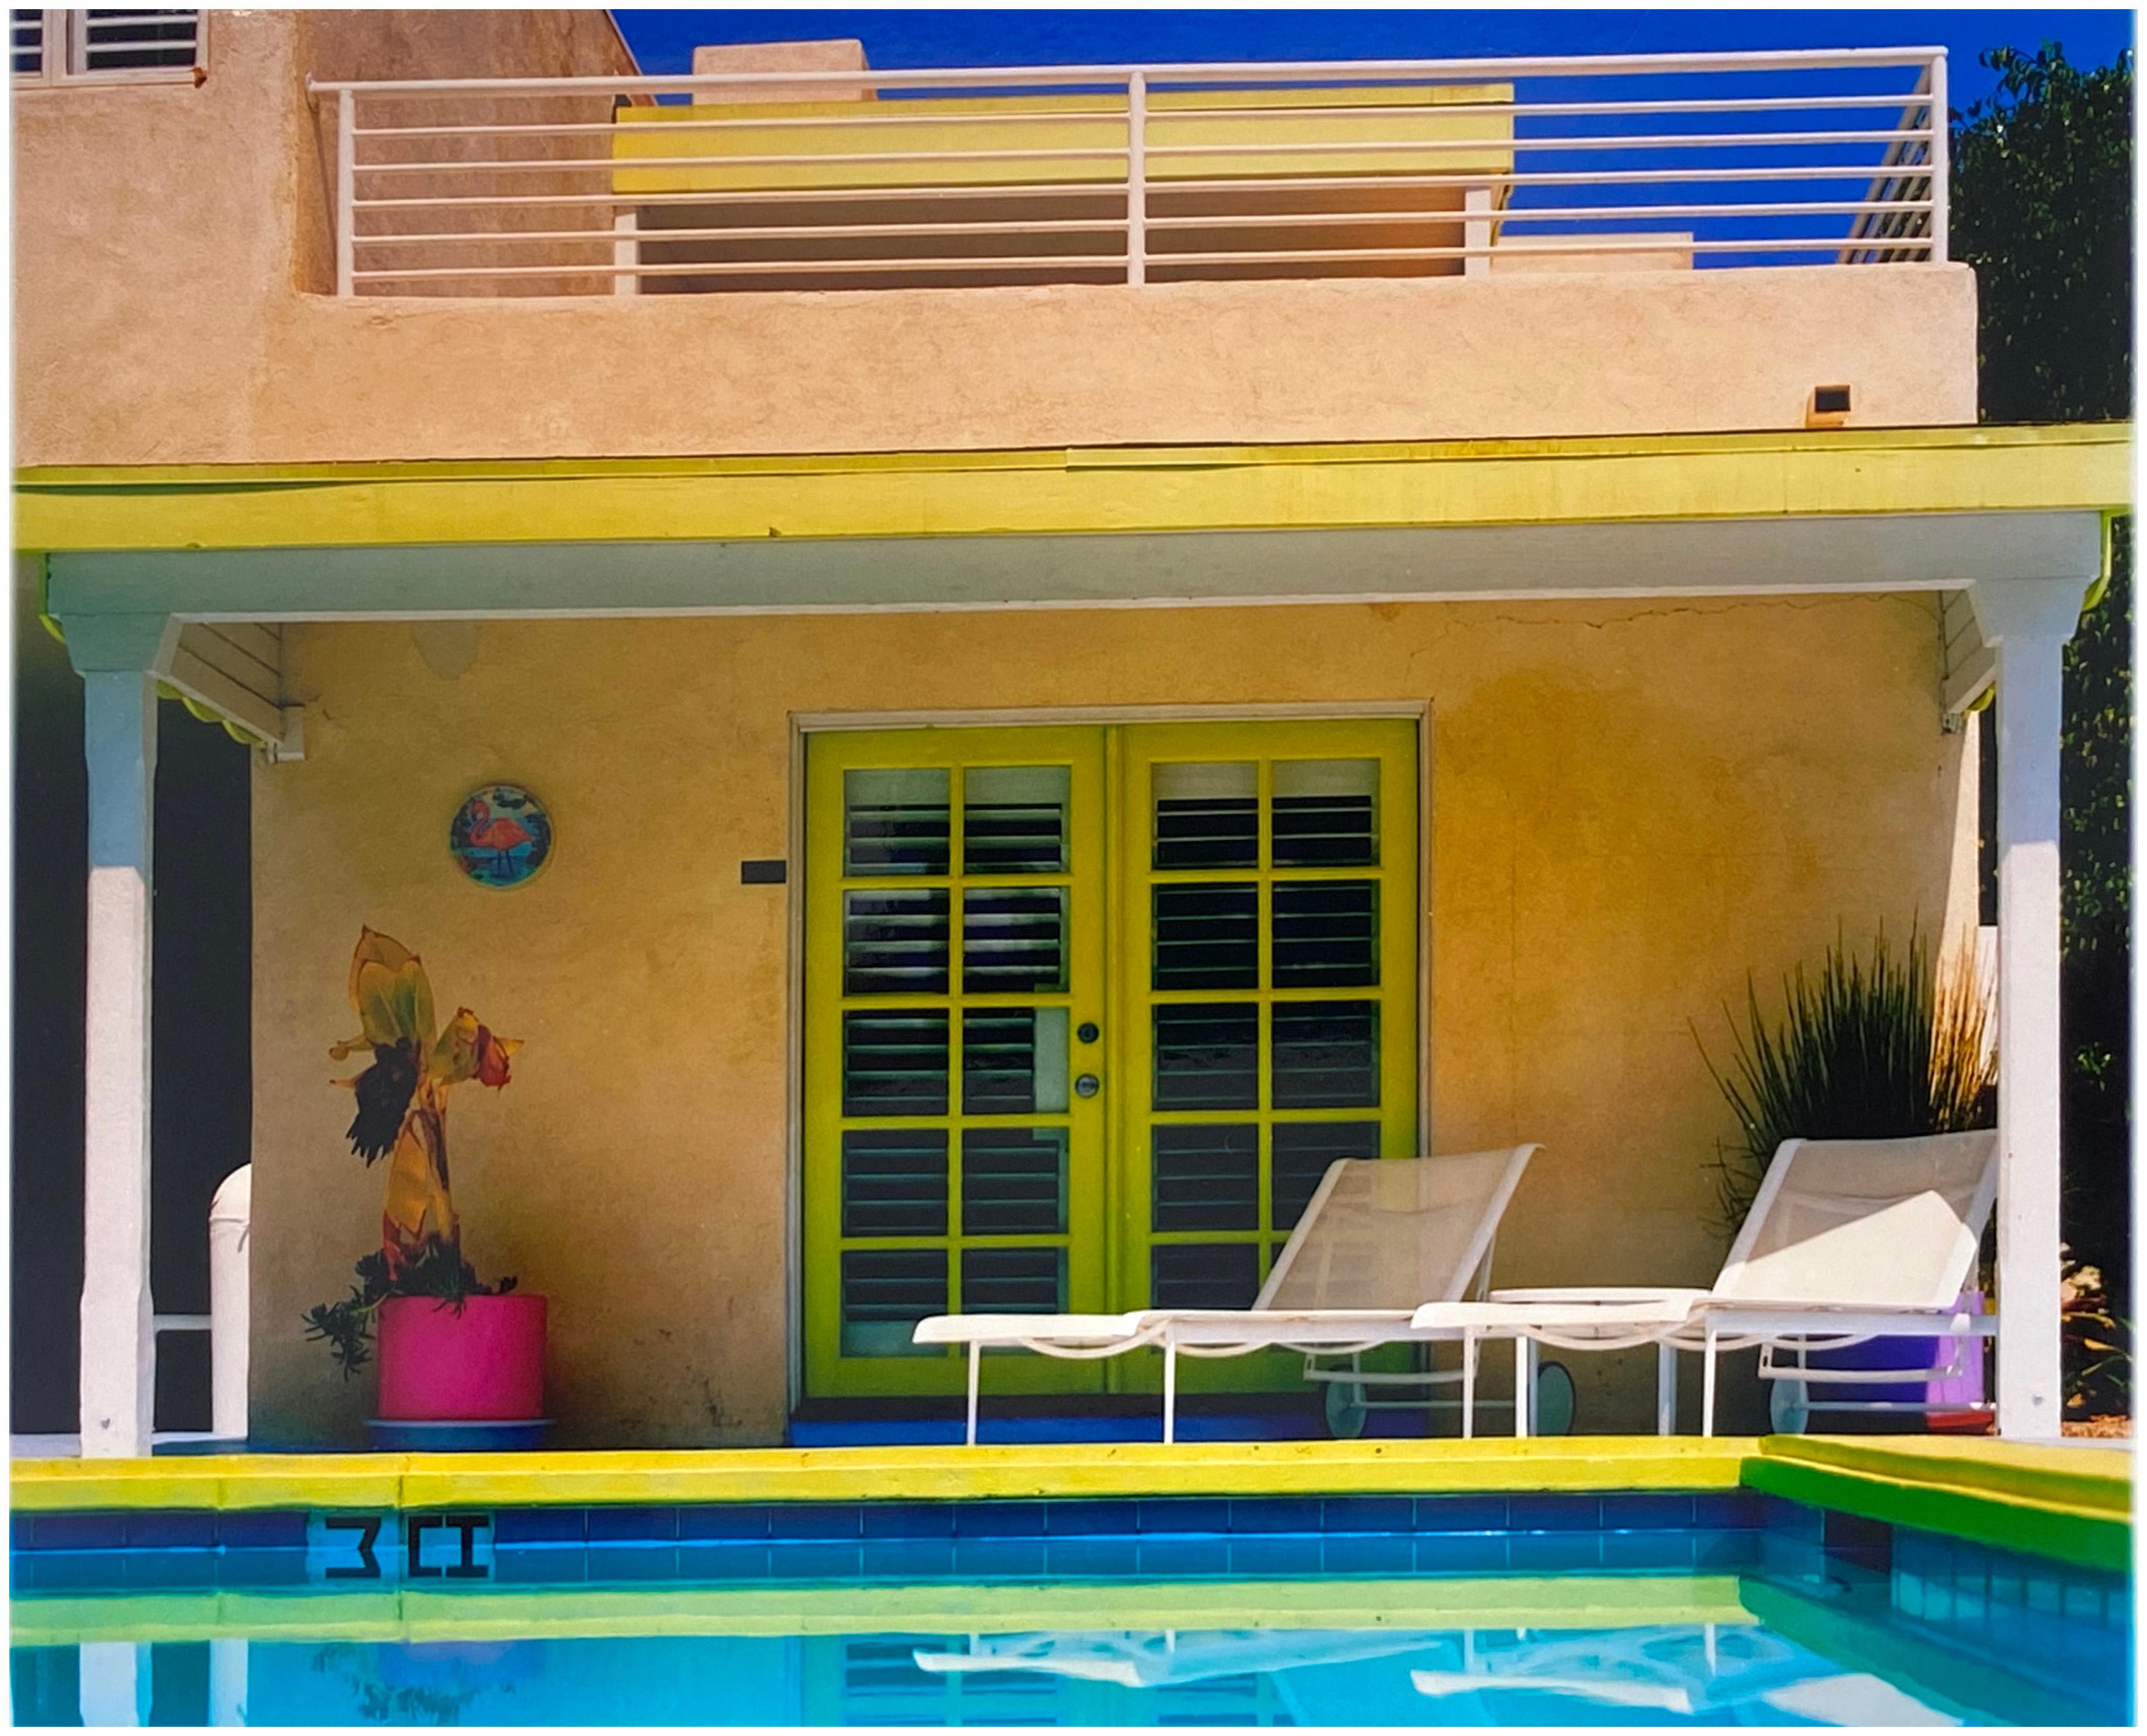 Richard Heeps Landscape Photograph - Palm Springs Pool Side II, California - American Architecture Color Photography